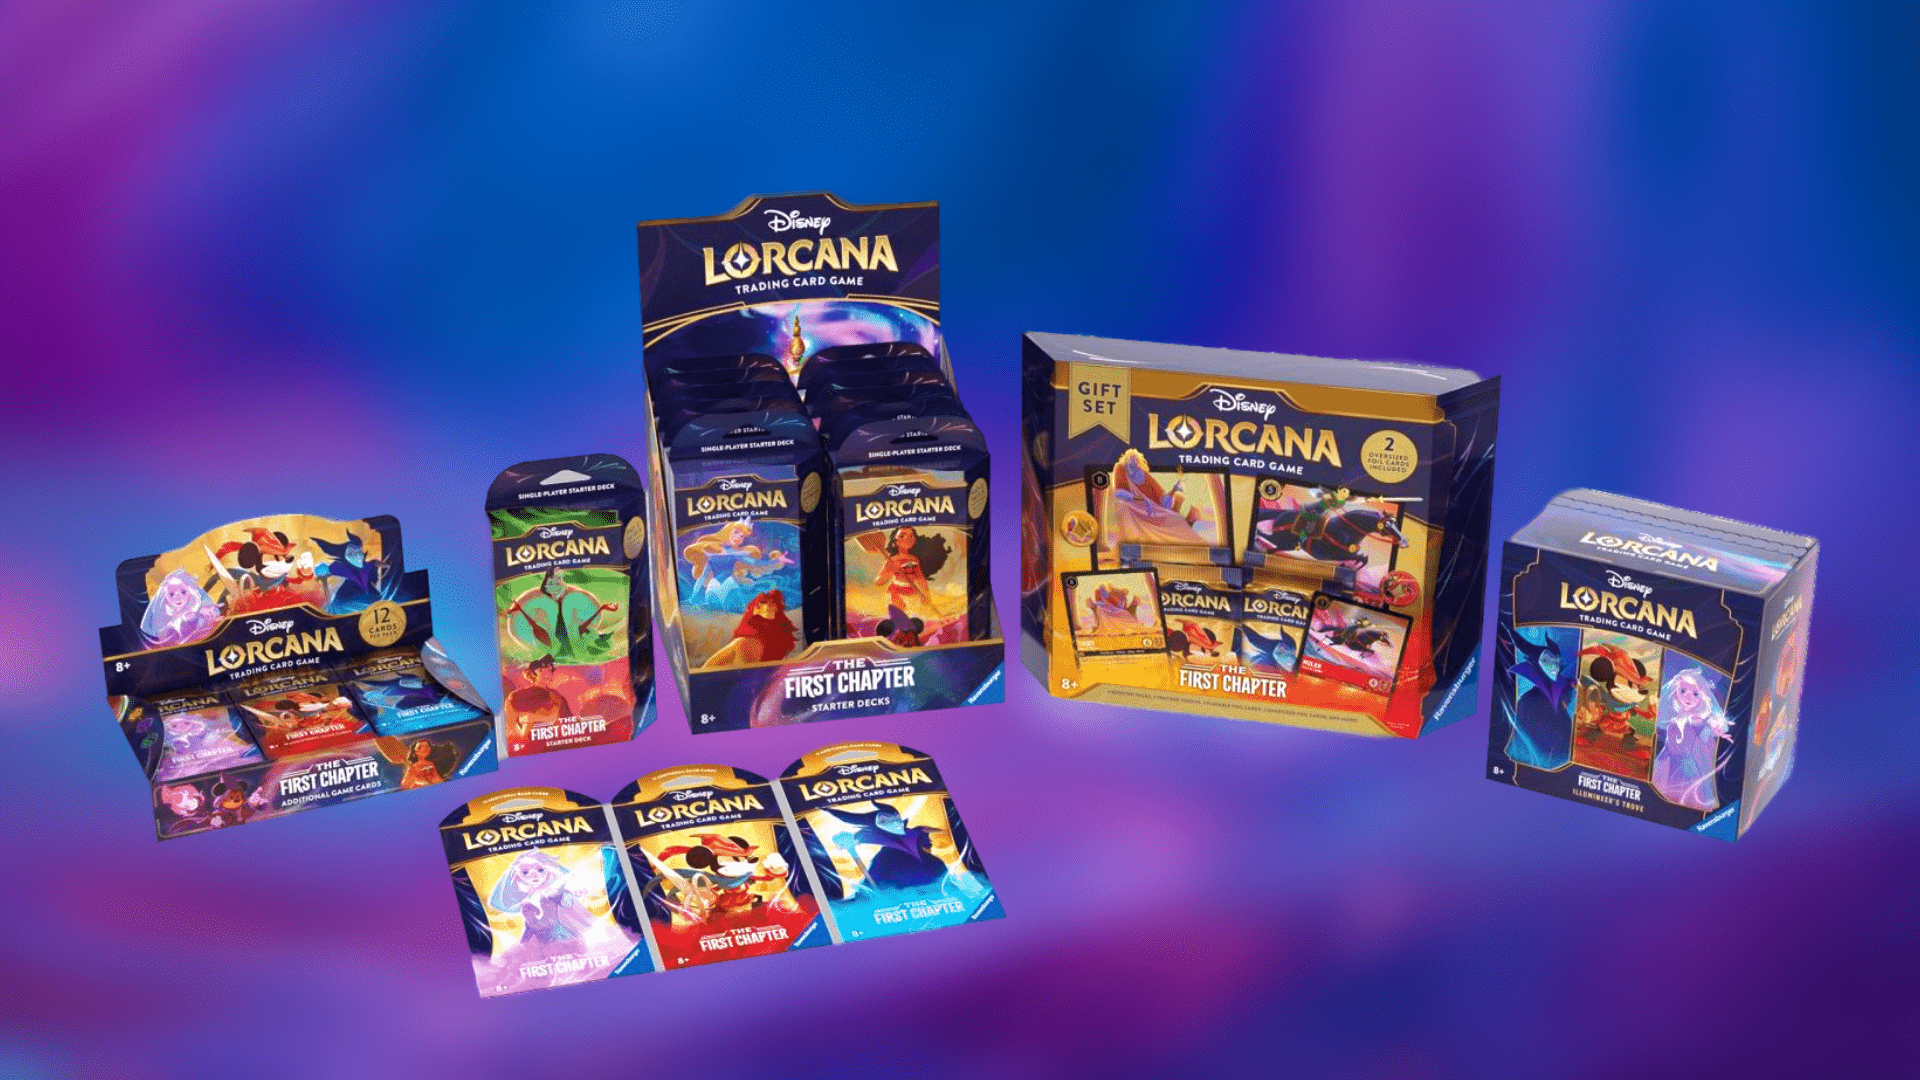 Lorcana products available September 1st